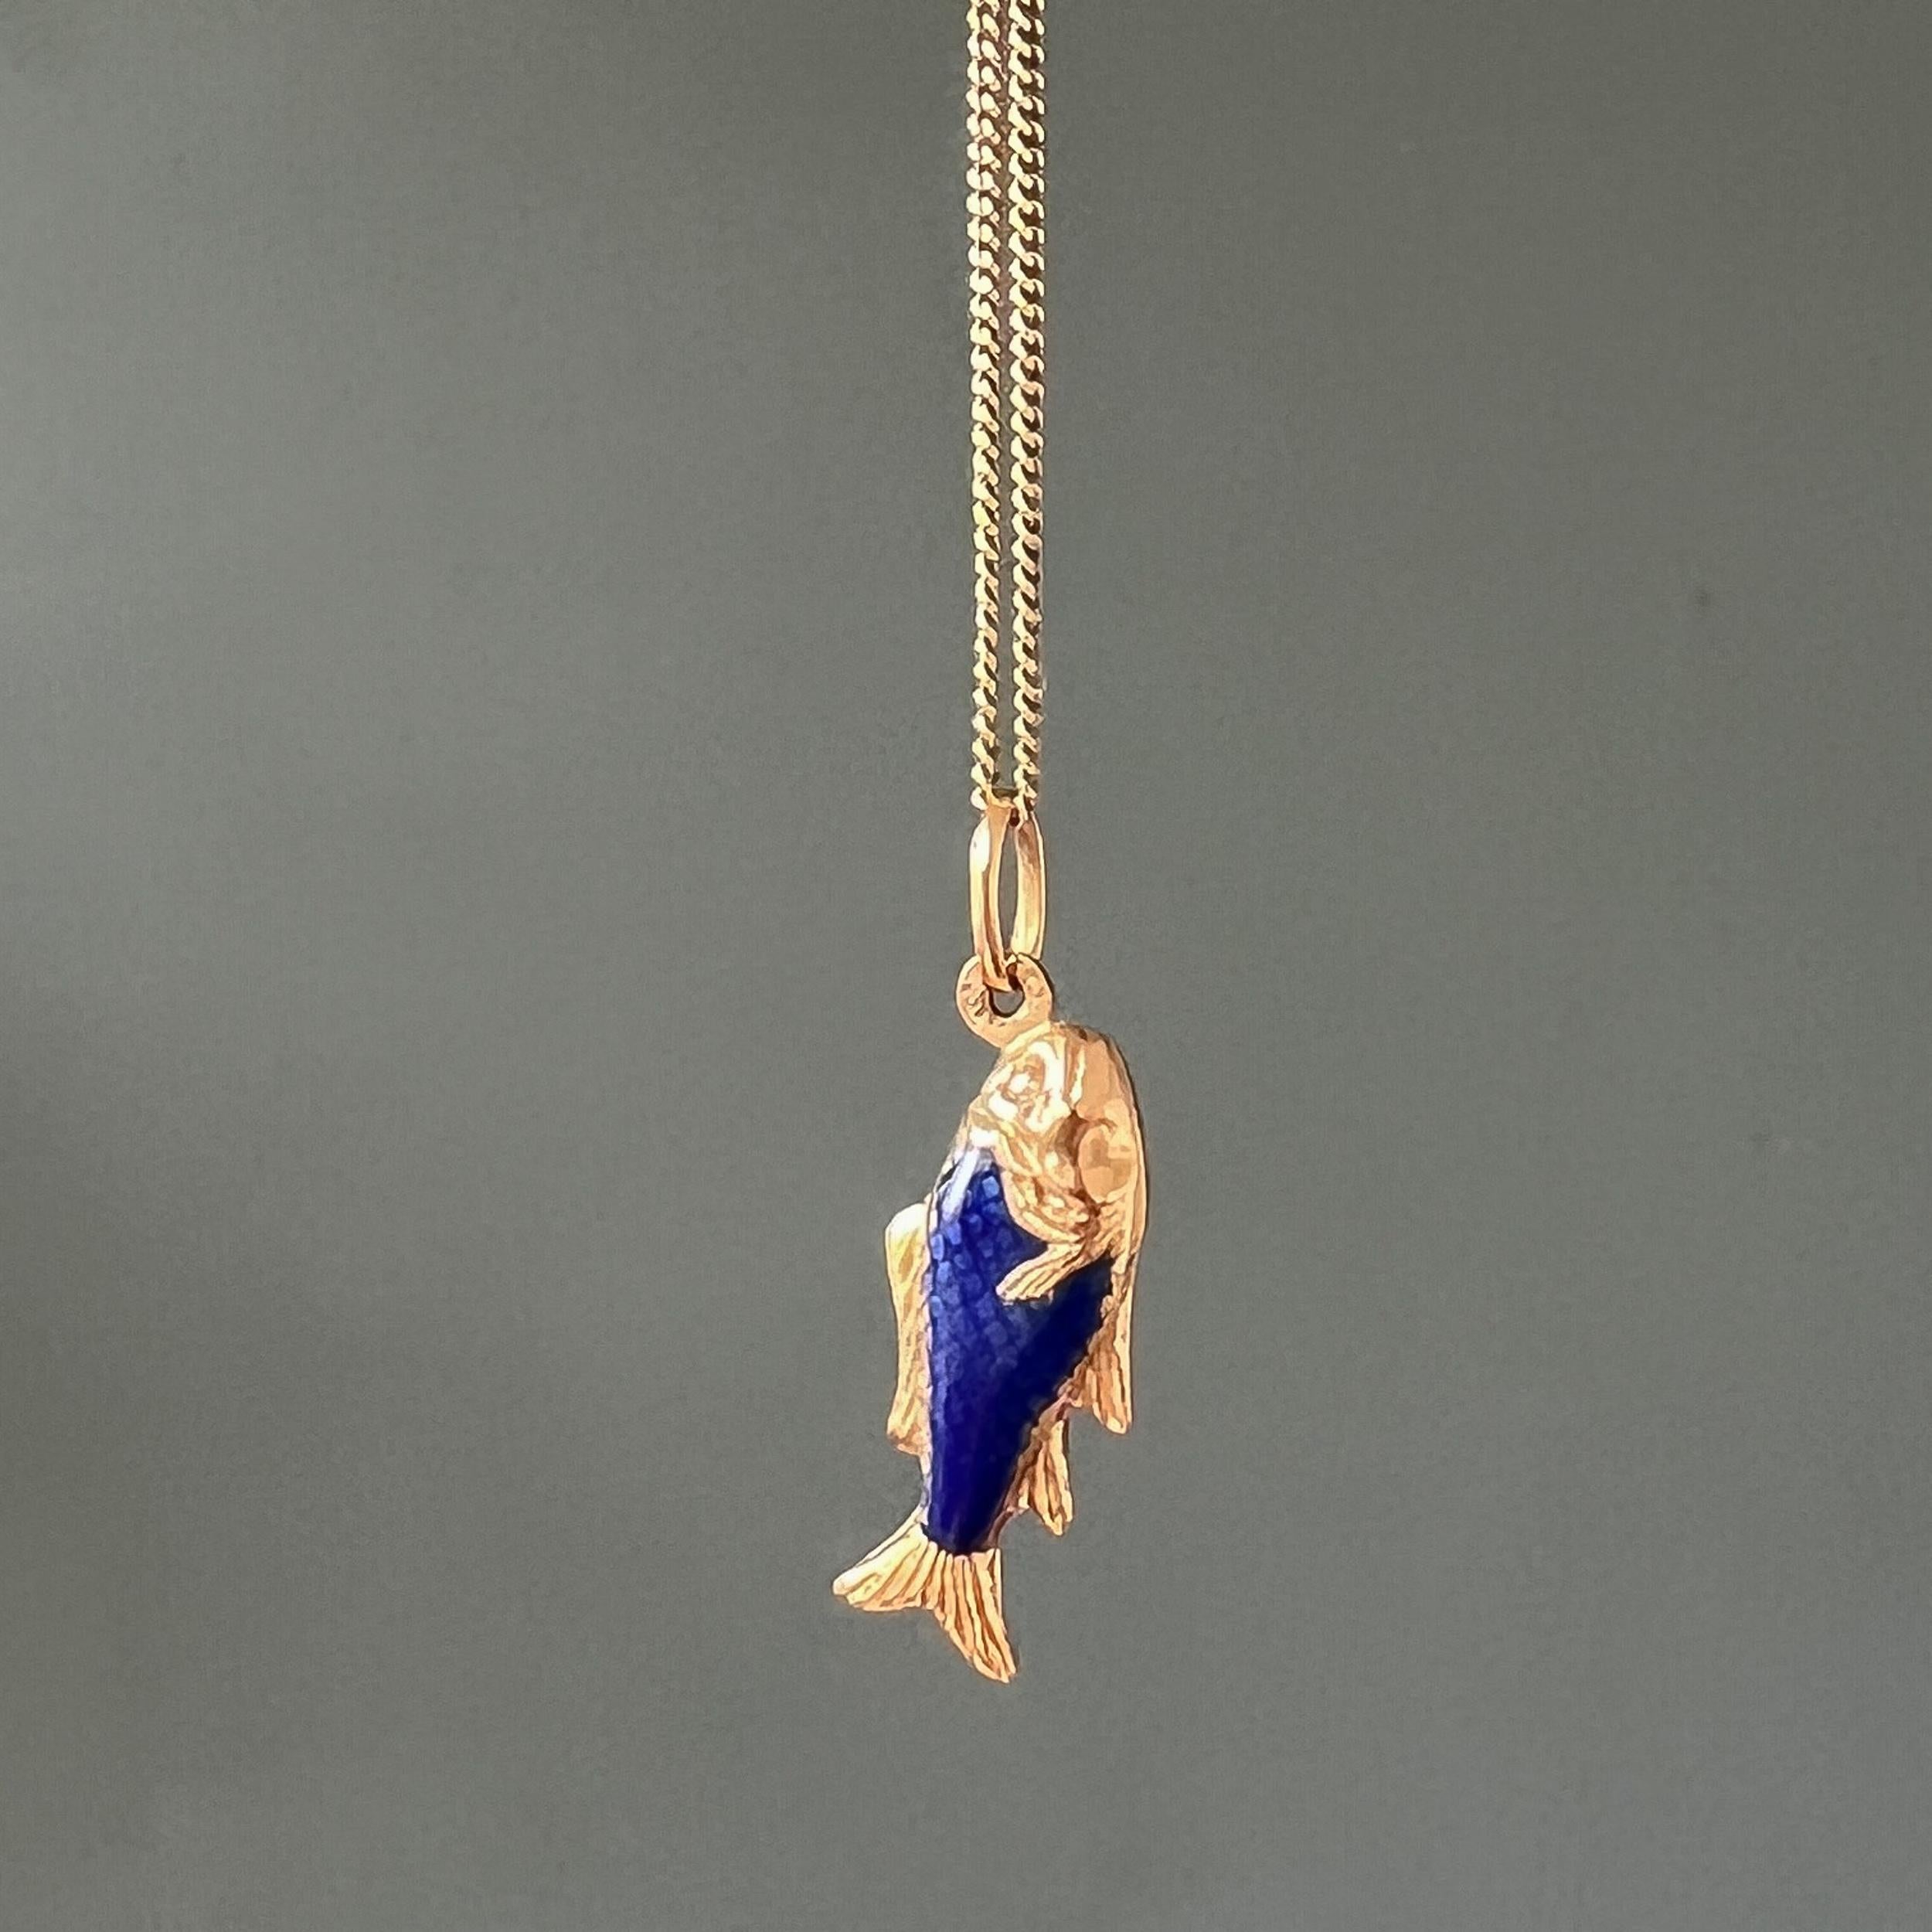 A vintage Italian gold fish charm pendant created with a blue enameled body. The fish is beautifully detailed and created with a great royal blue scaly skin. Designed in 18 karat yellow gold, the body is detailed with raised work and finished with